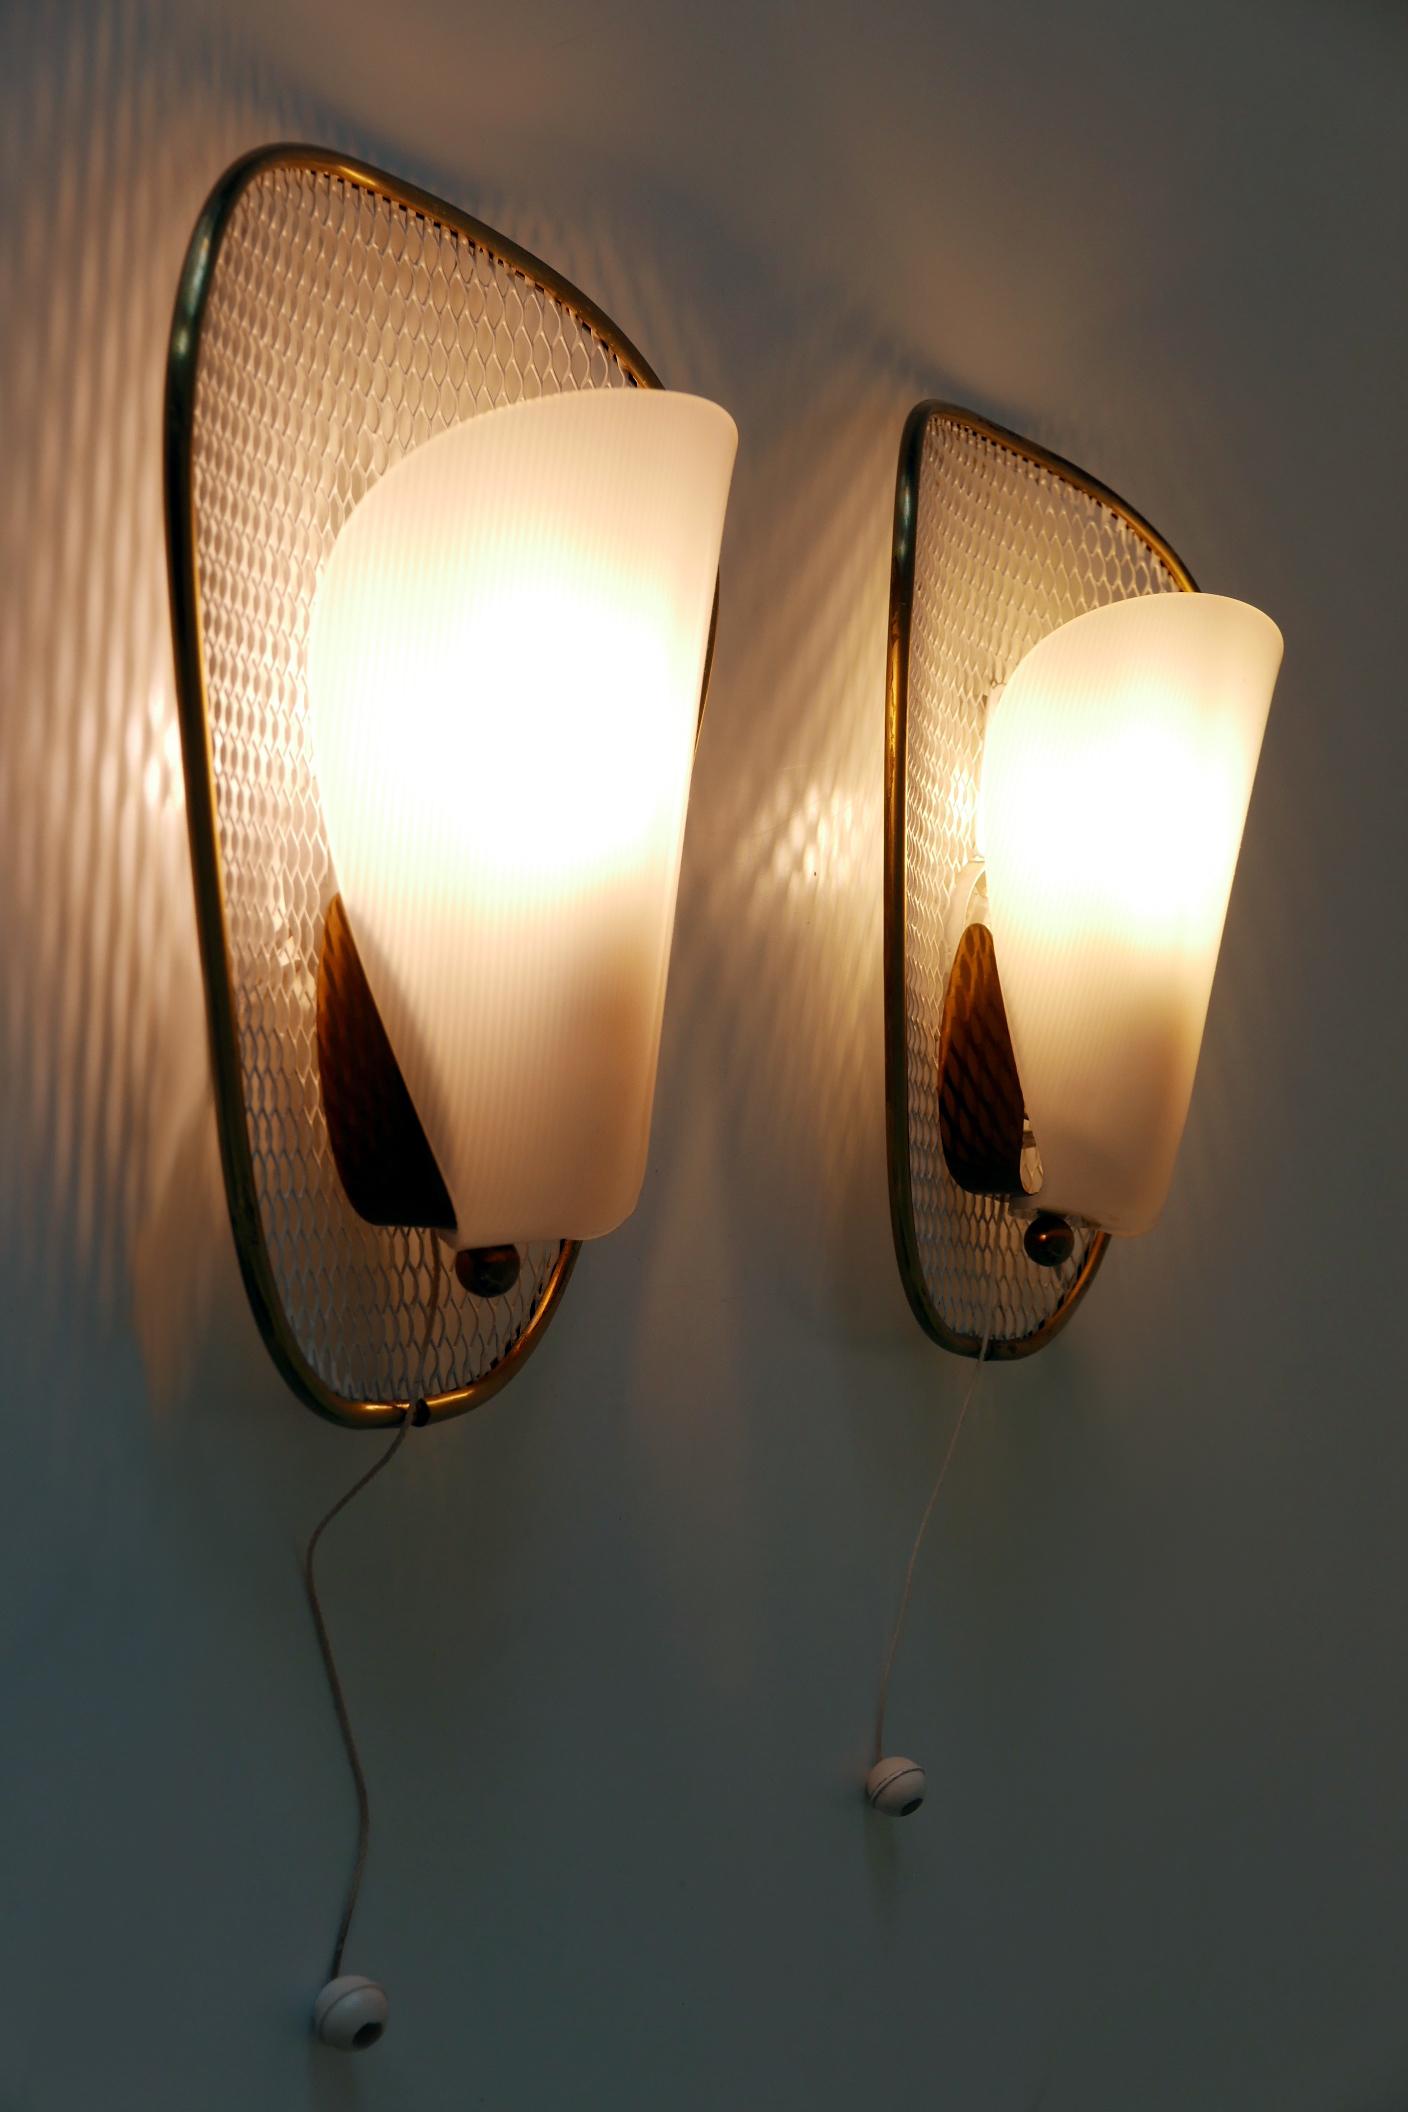 Set of Two Rare & Elegant Mid-Century Modern Sconces or Wall Lamps Germany 1950s For Sale 10